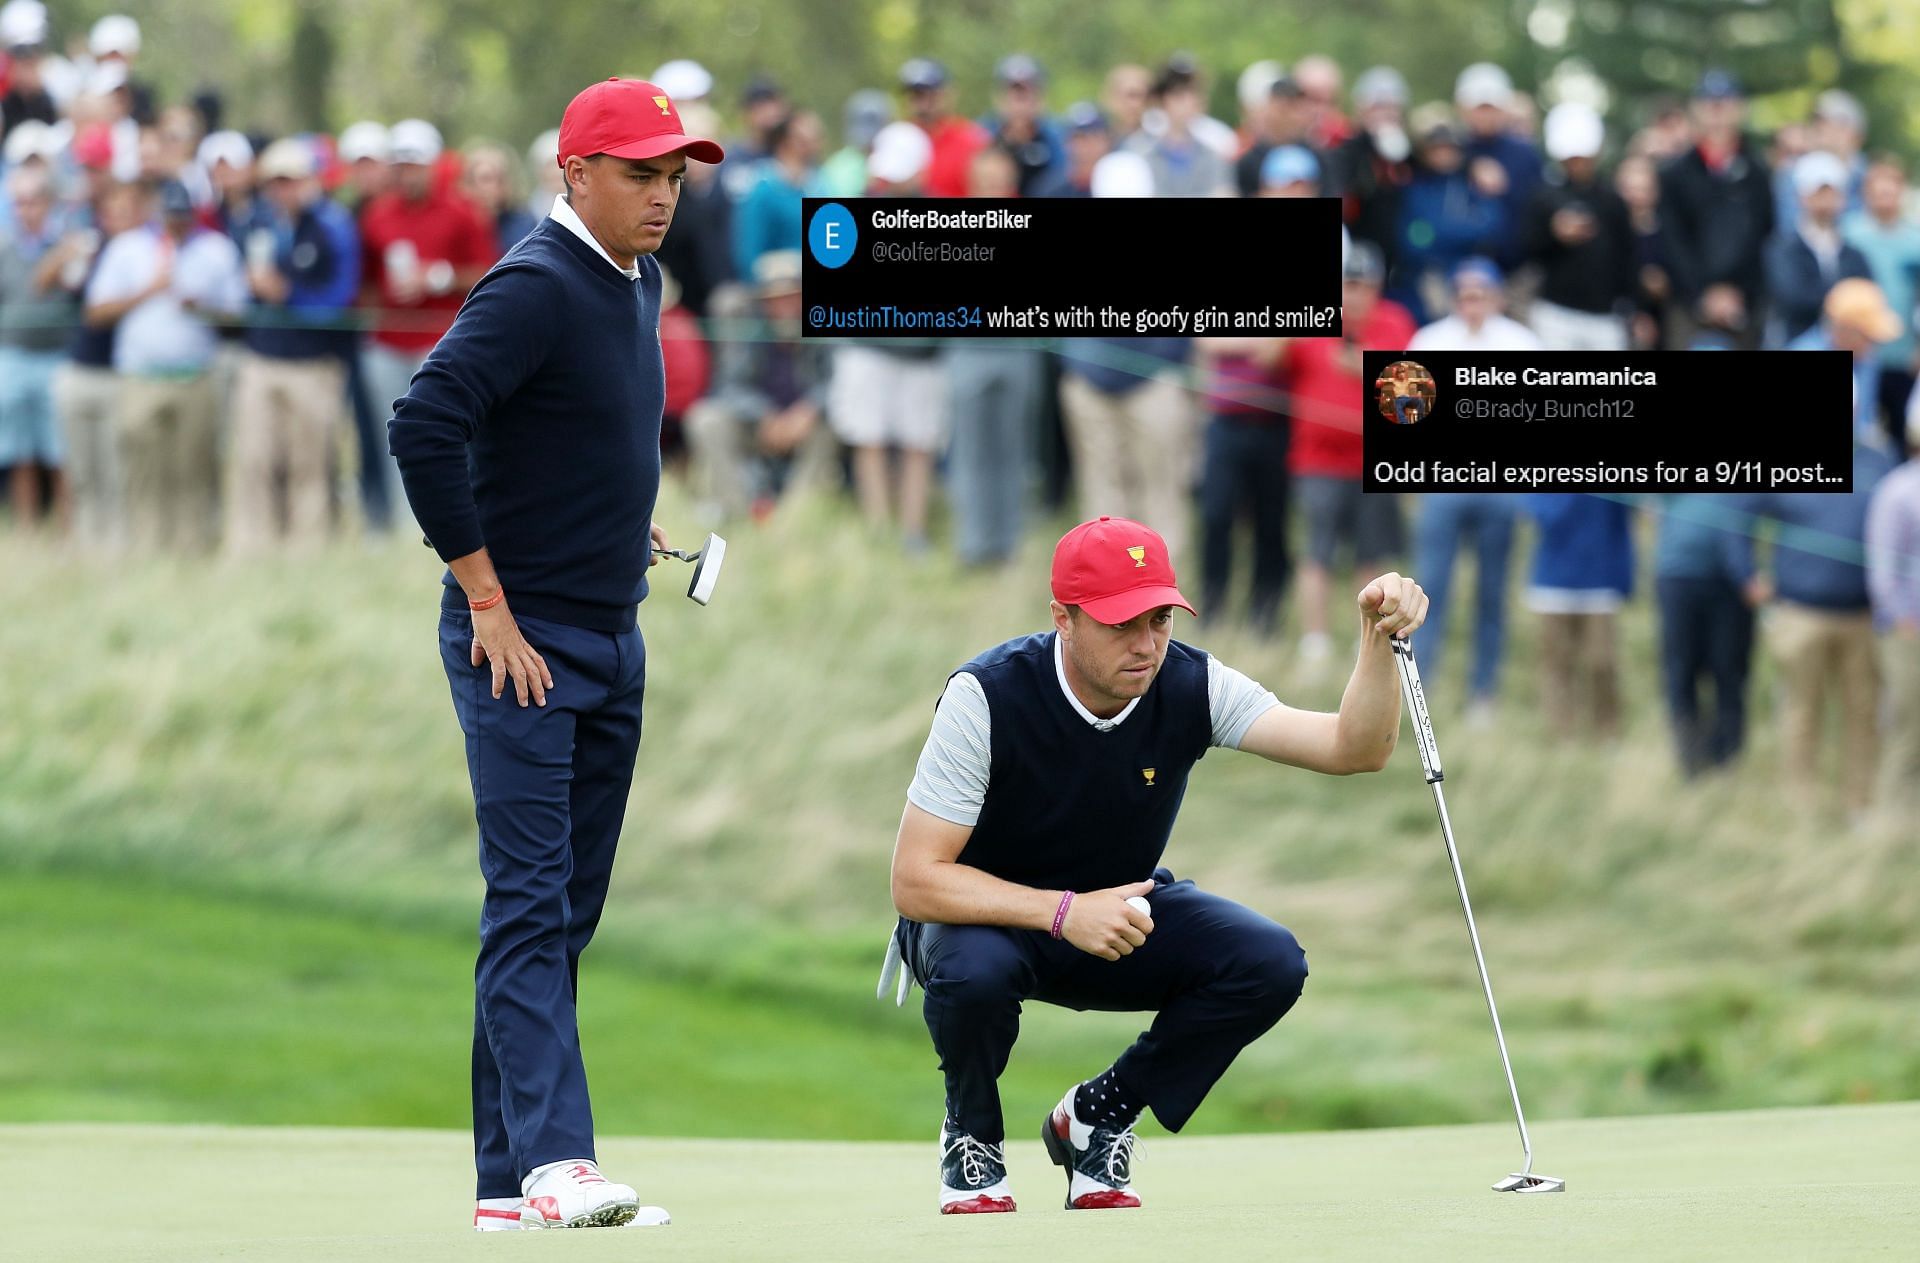 Rickie Fowler and Justin Thomas photograph on the anniversary of 9/11 wasn